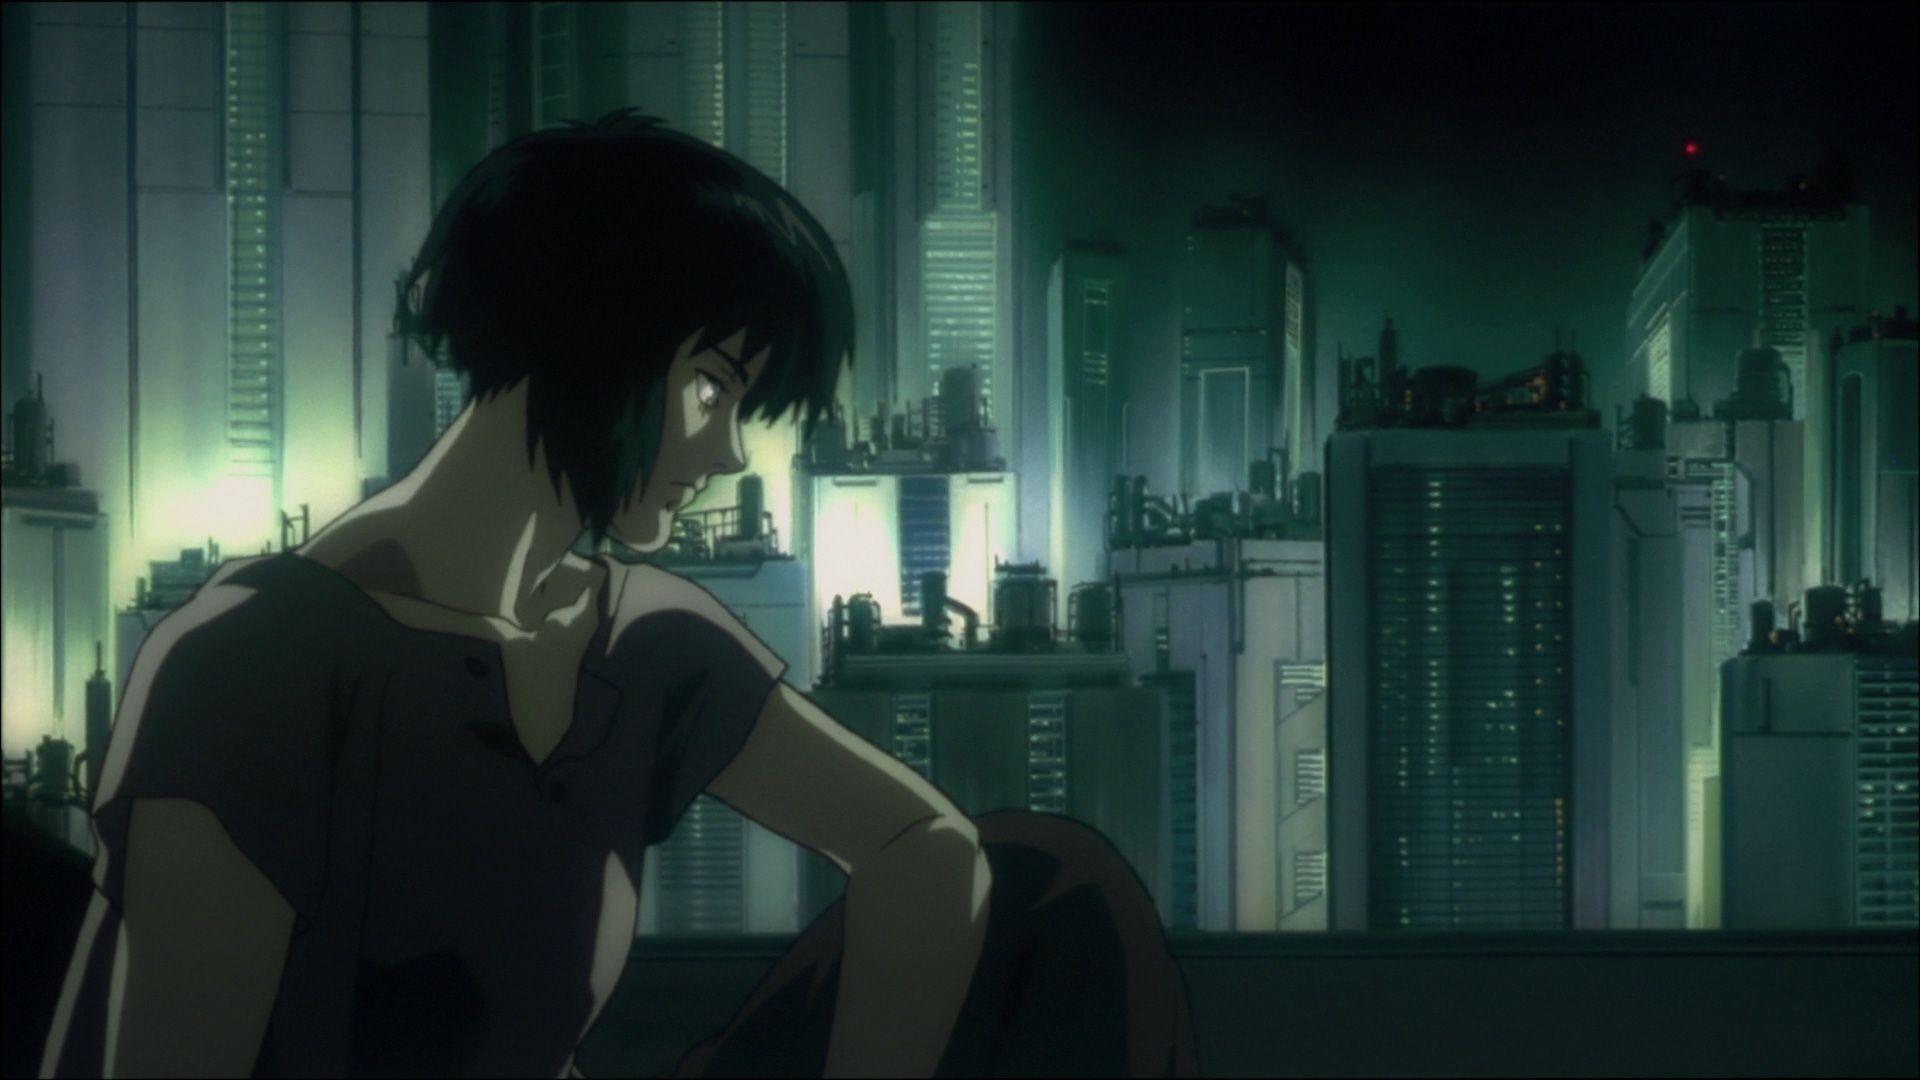 The 1995 Anime “Ghost in the Shell” is more relevant than ever